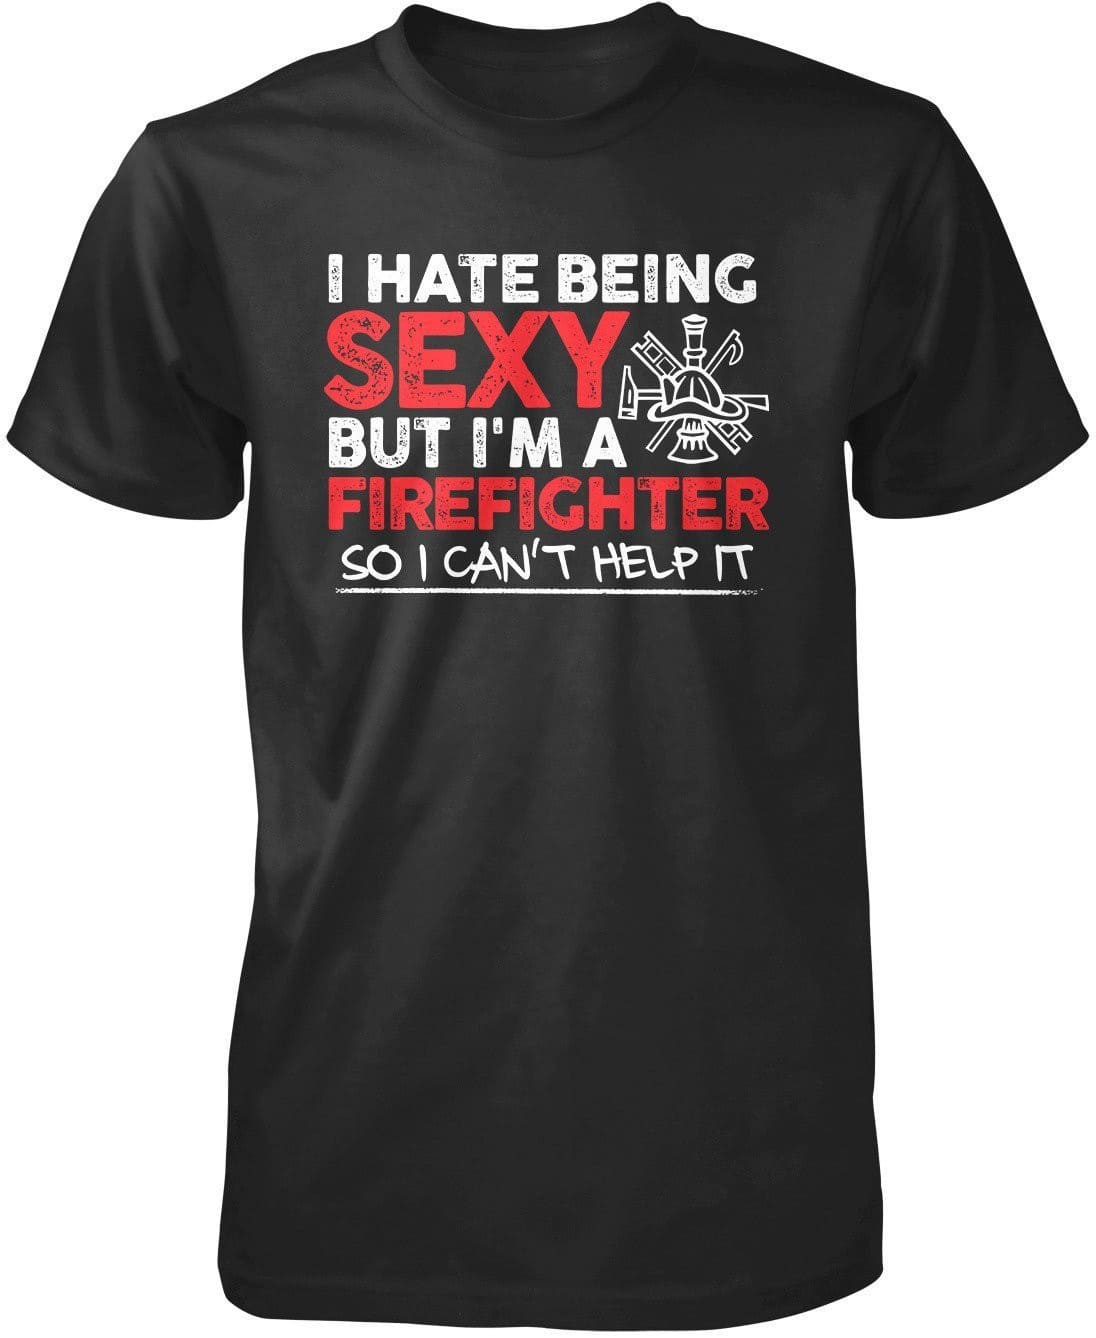 I Hate Being Sexy But I'm a Firefighter T-Shirt